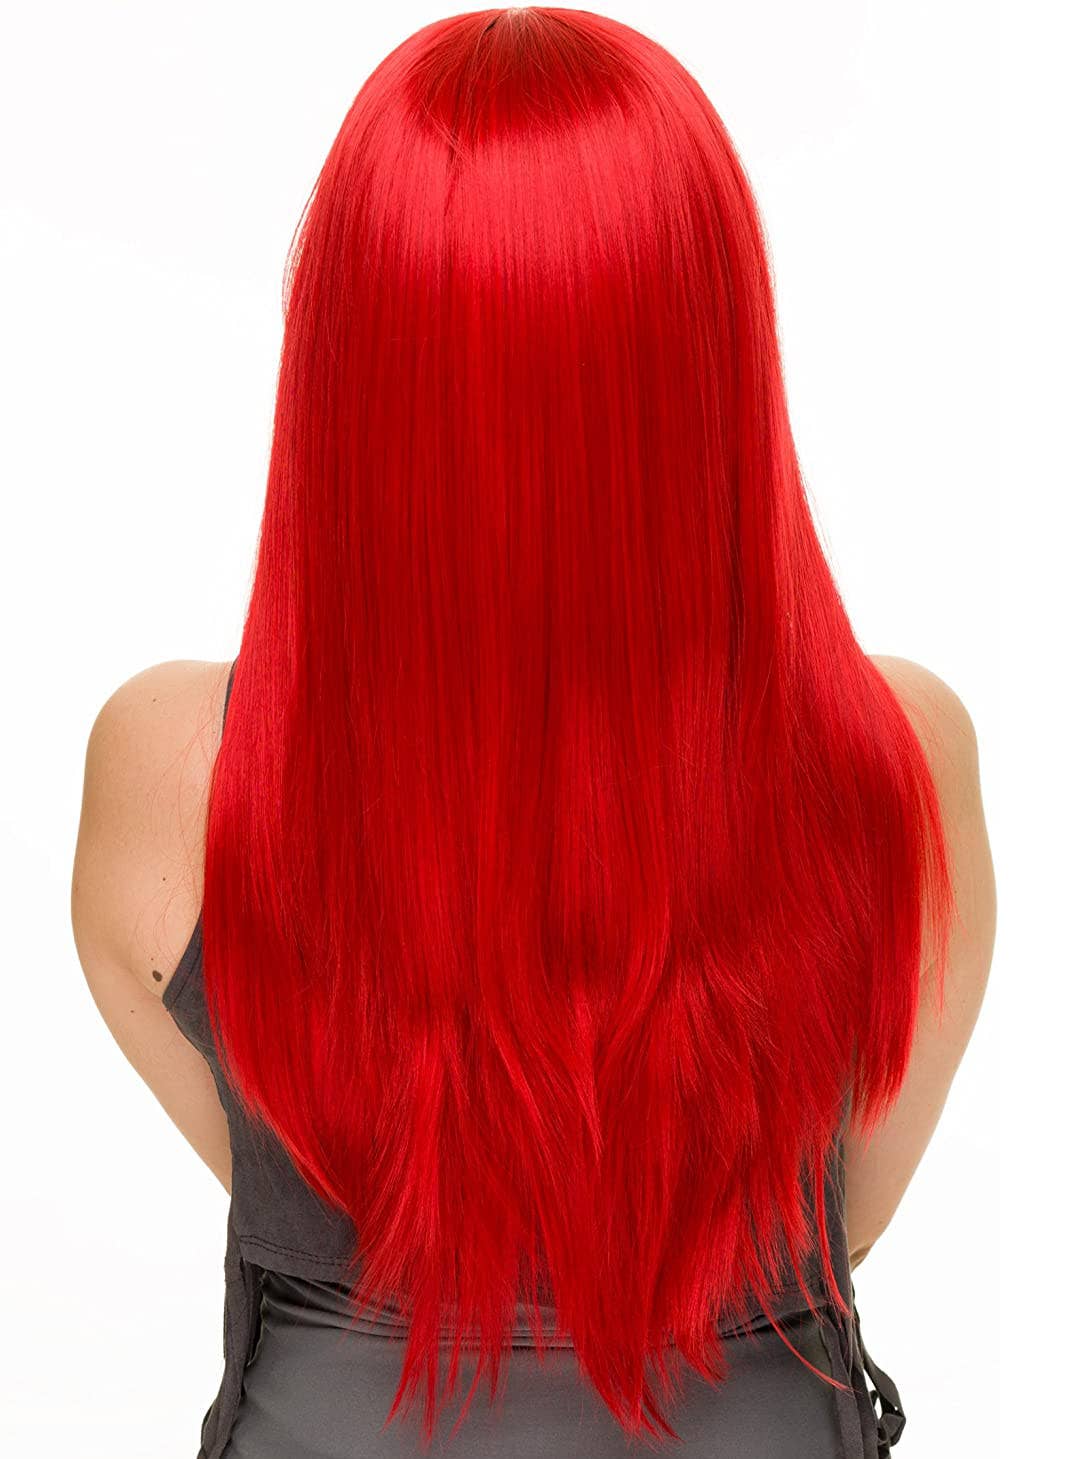 Bright Red Women's Deluxe Heat Resistant Straight Wig with Bangs Back Image